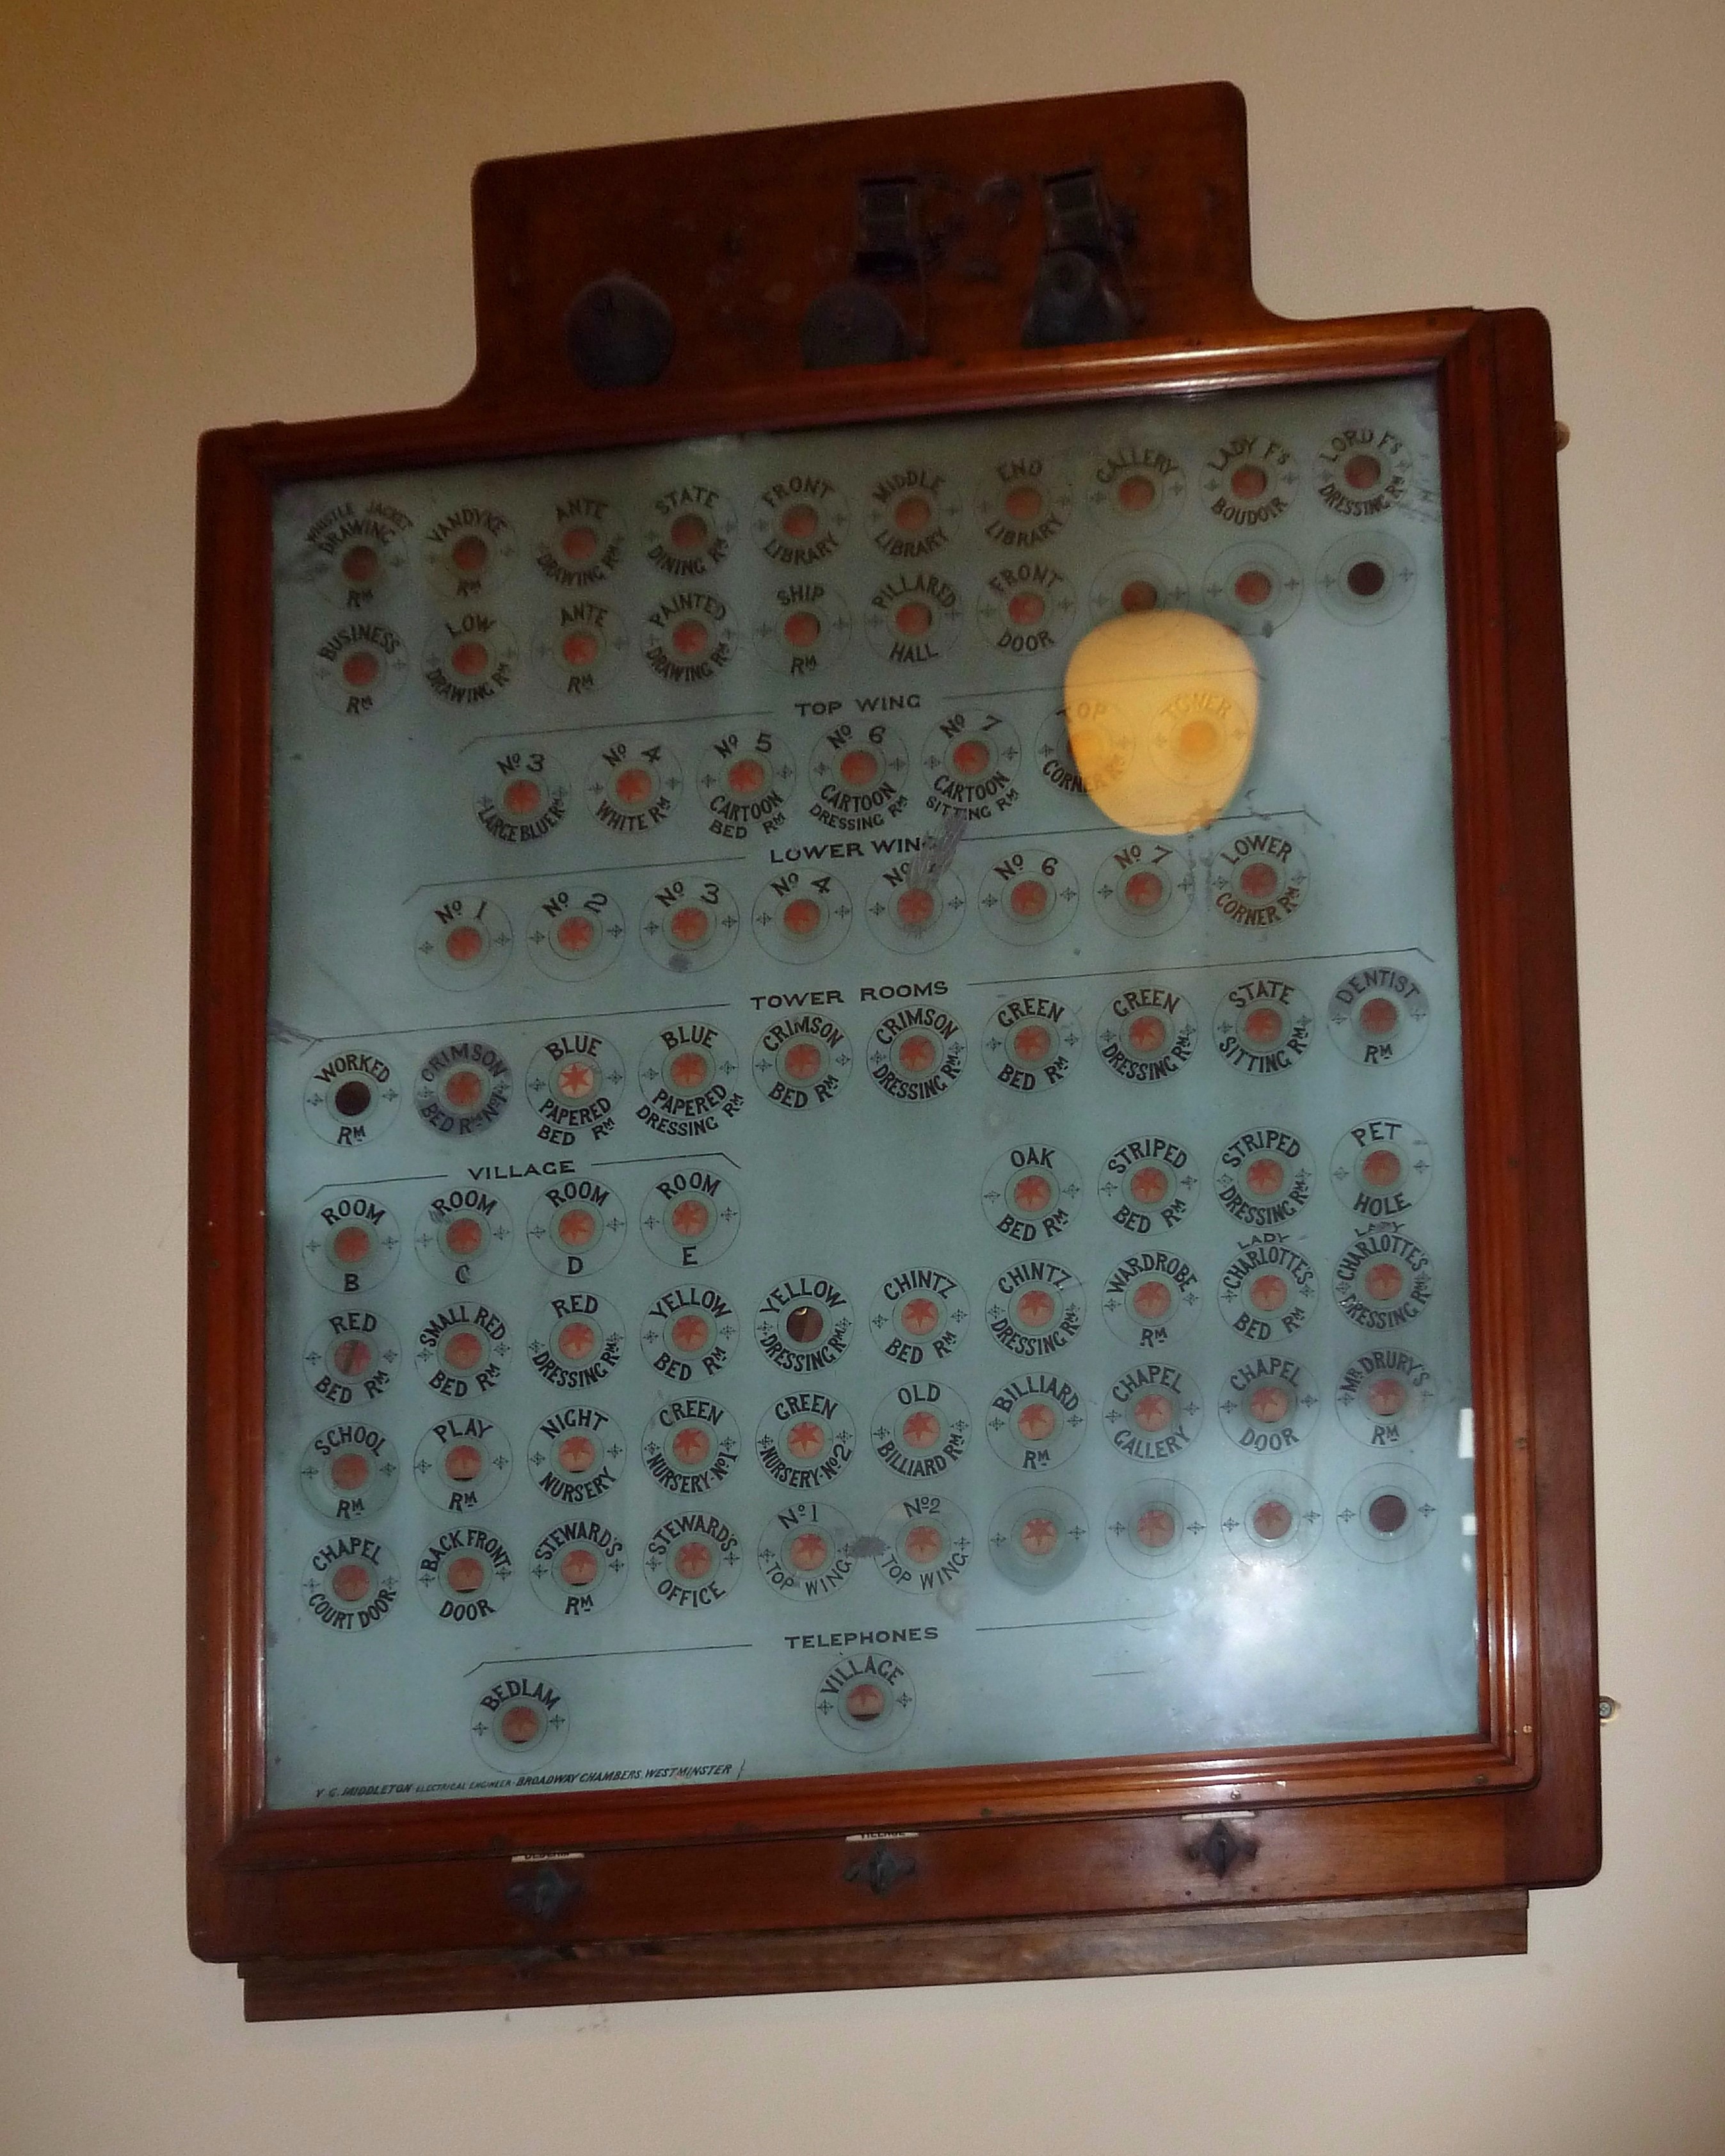 Servant’s bell board at Wentworth Woodhouse